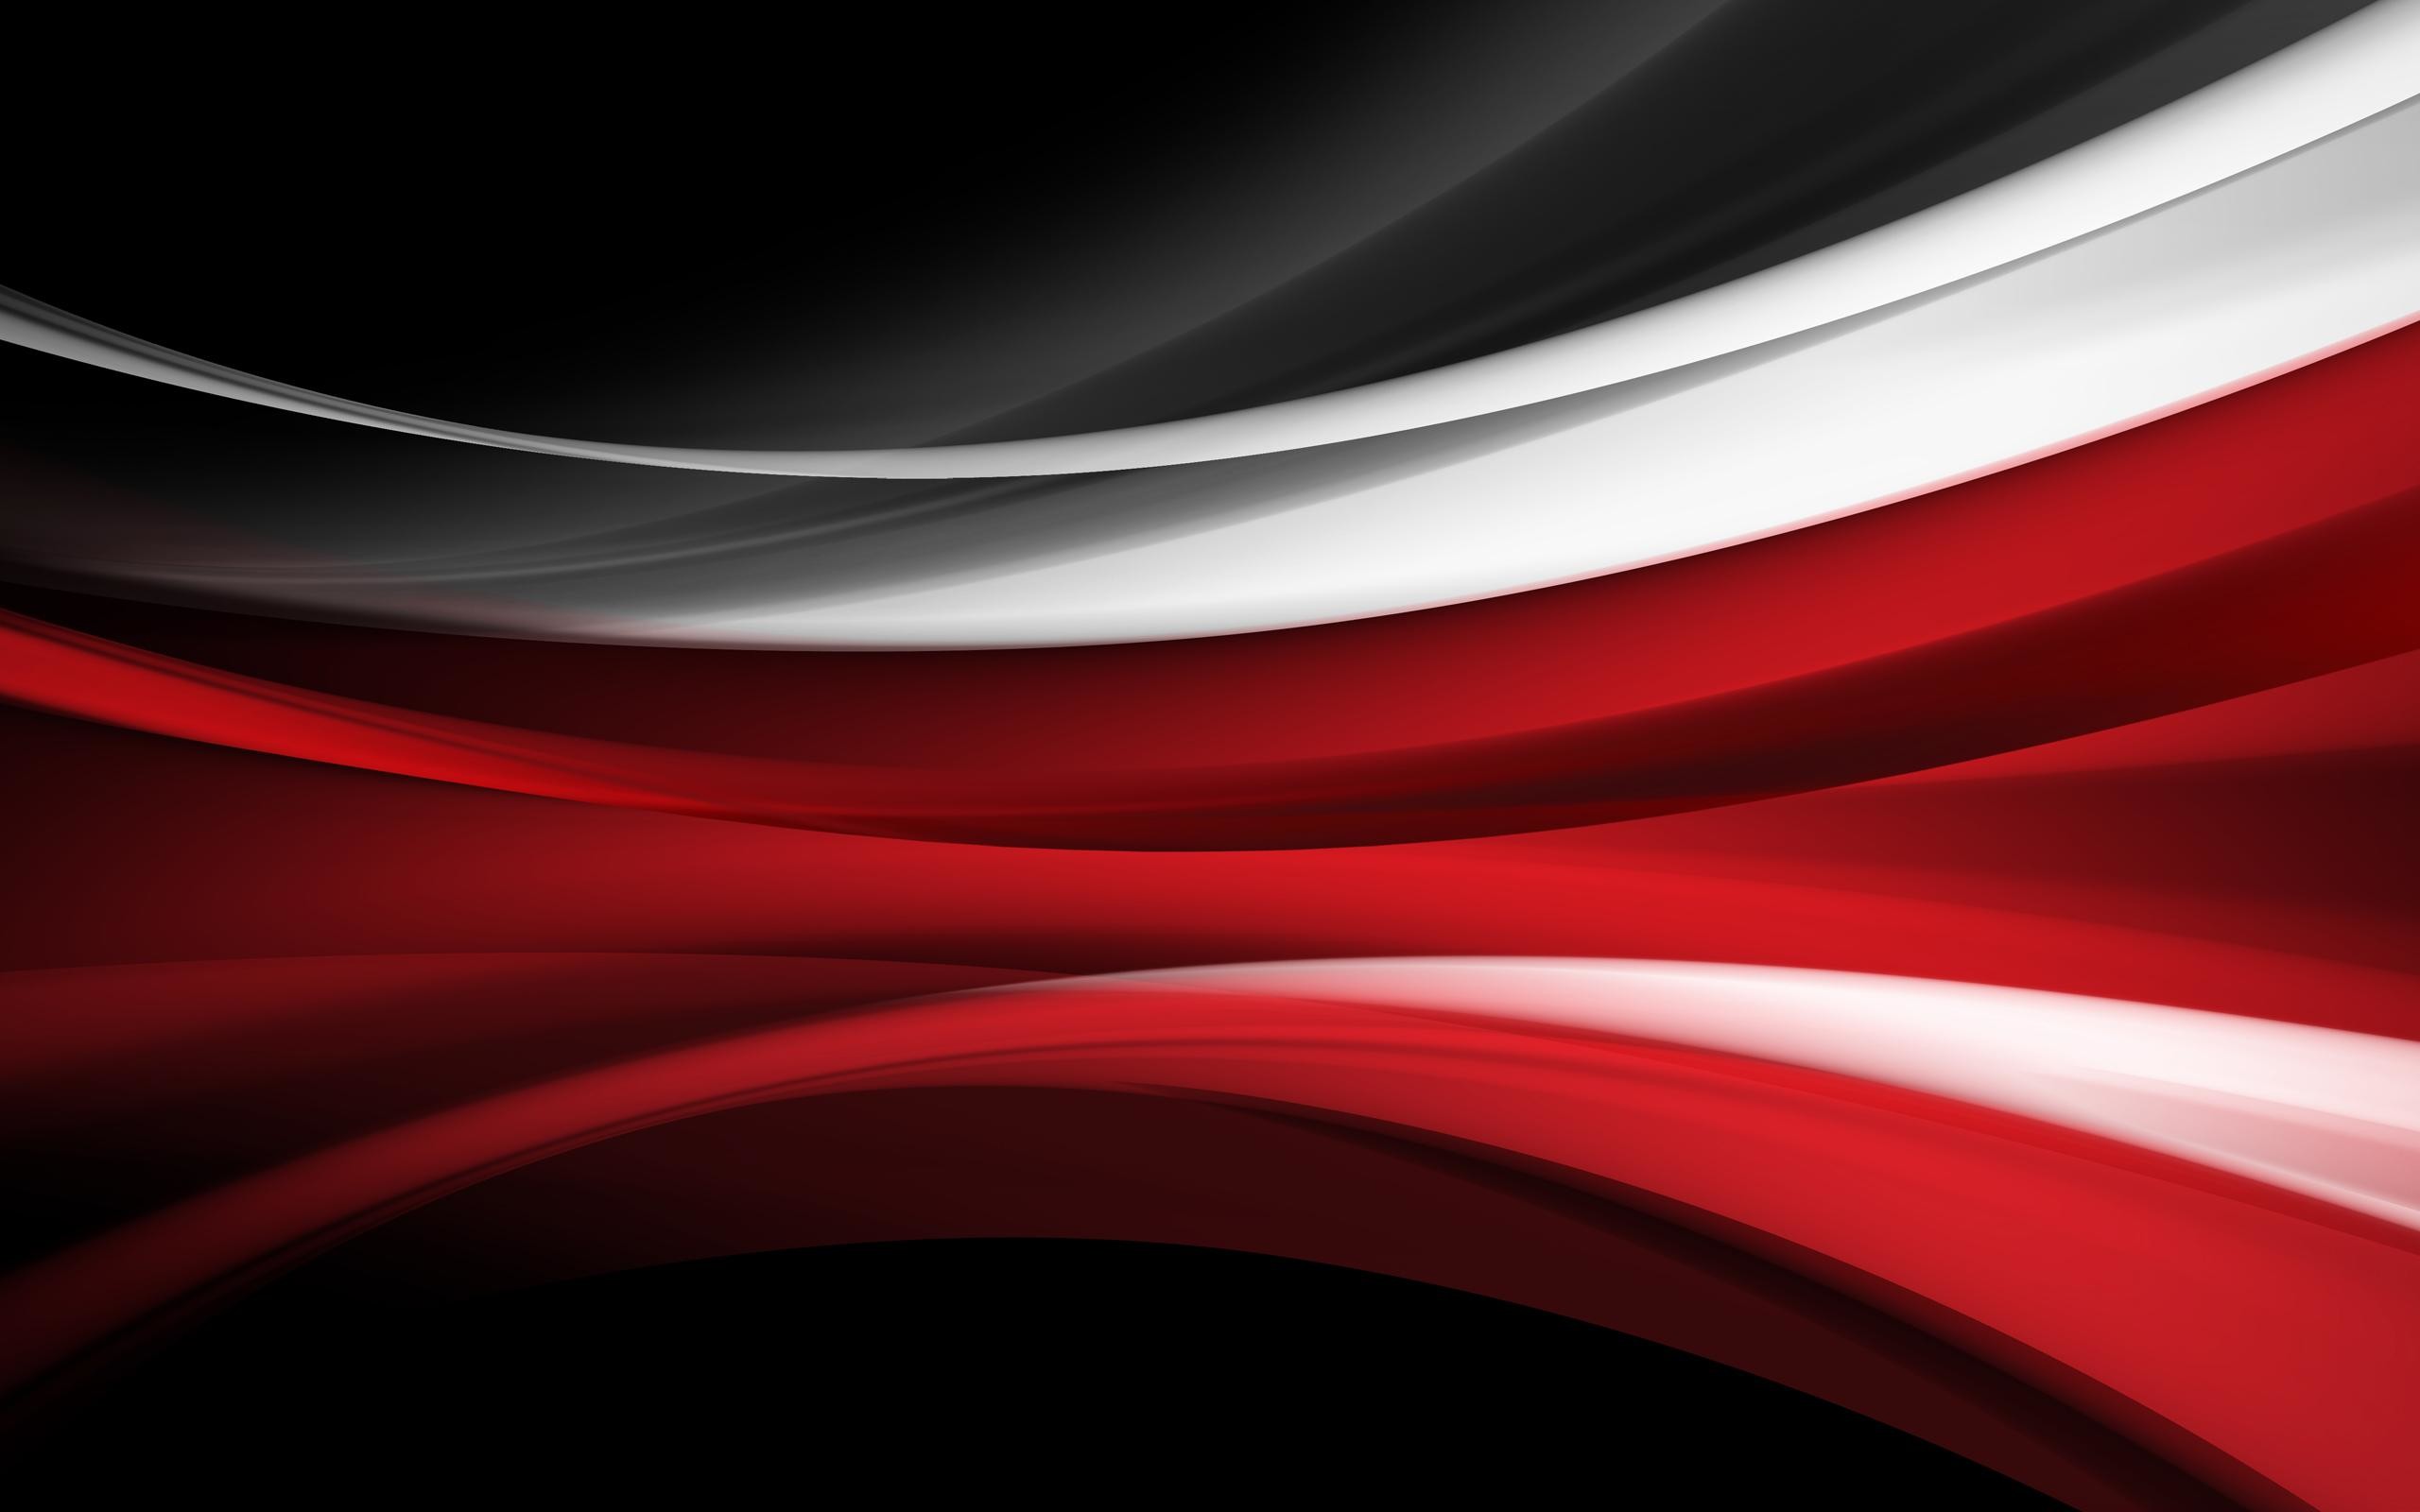 2560x1600 Free HD Black And Red Wallpapers For Desktop.